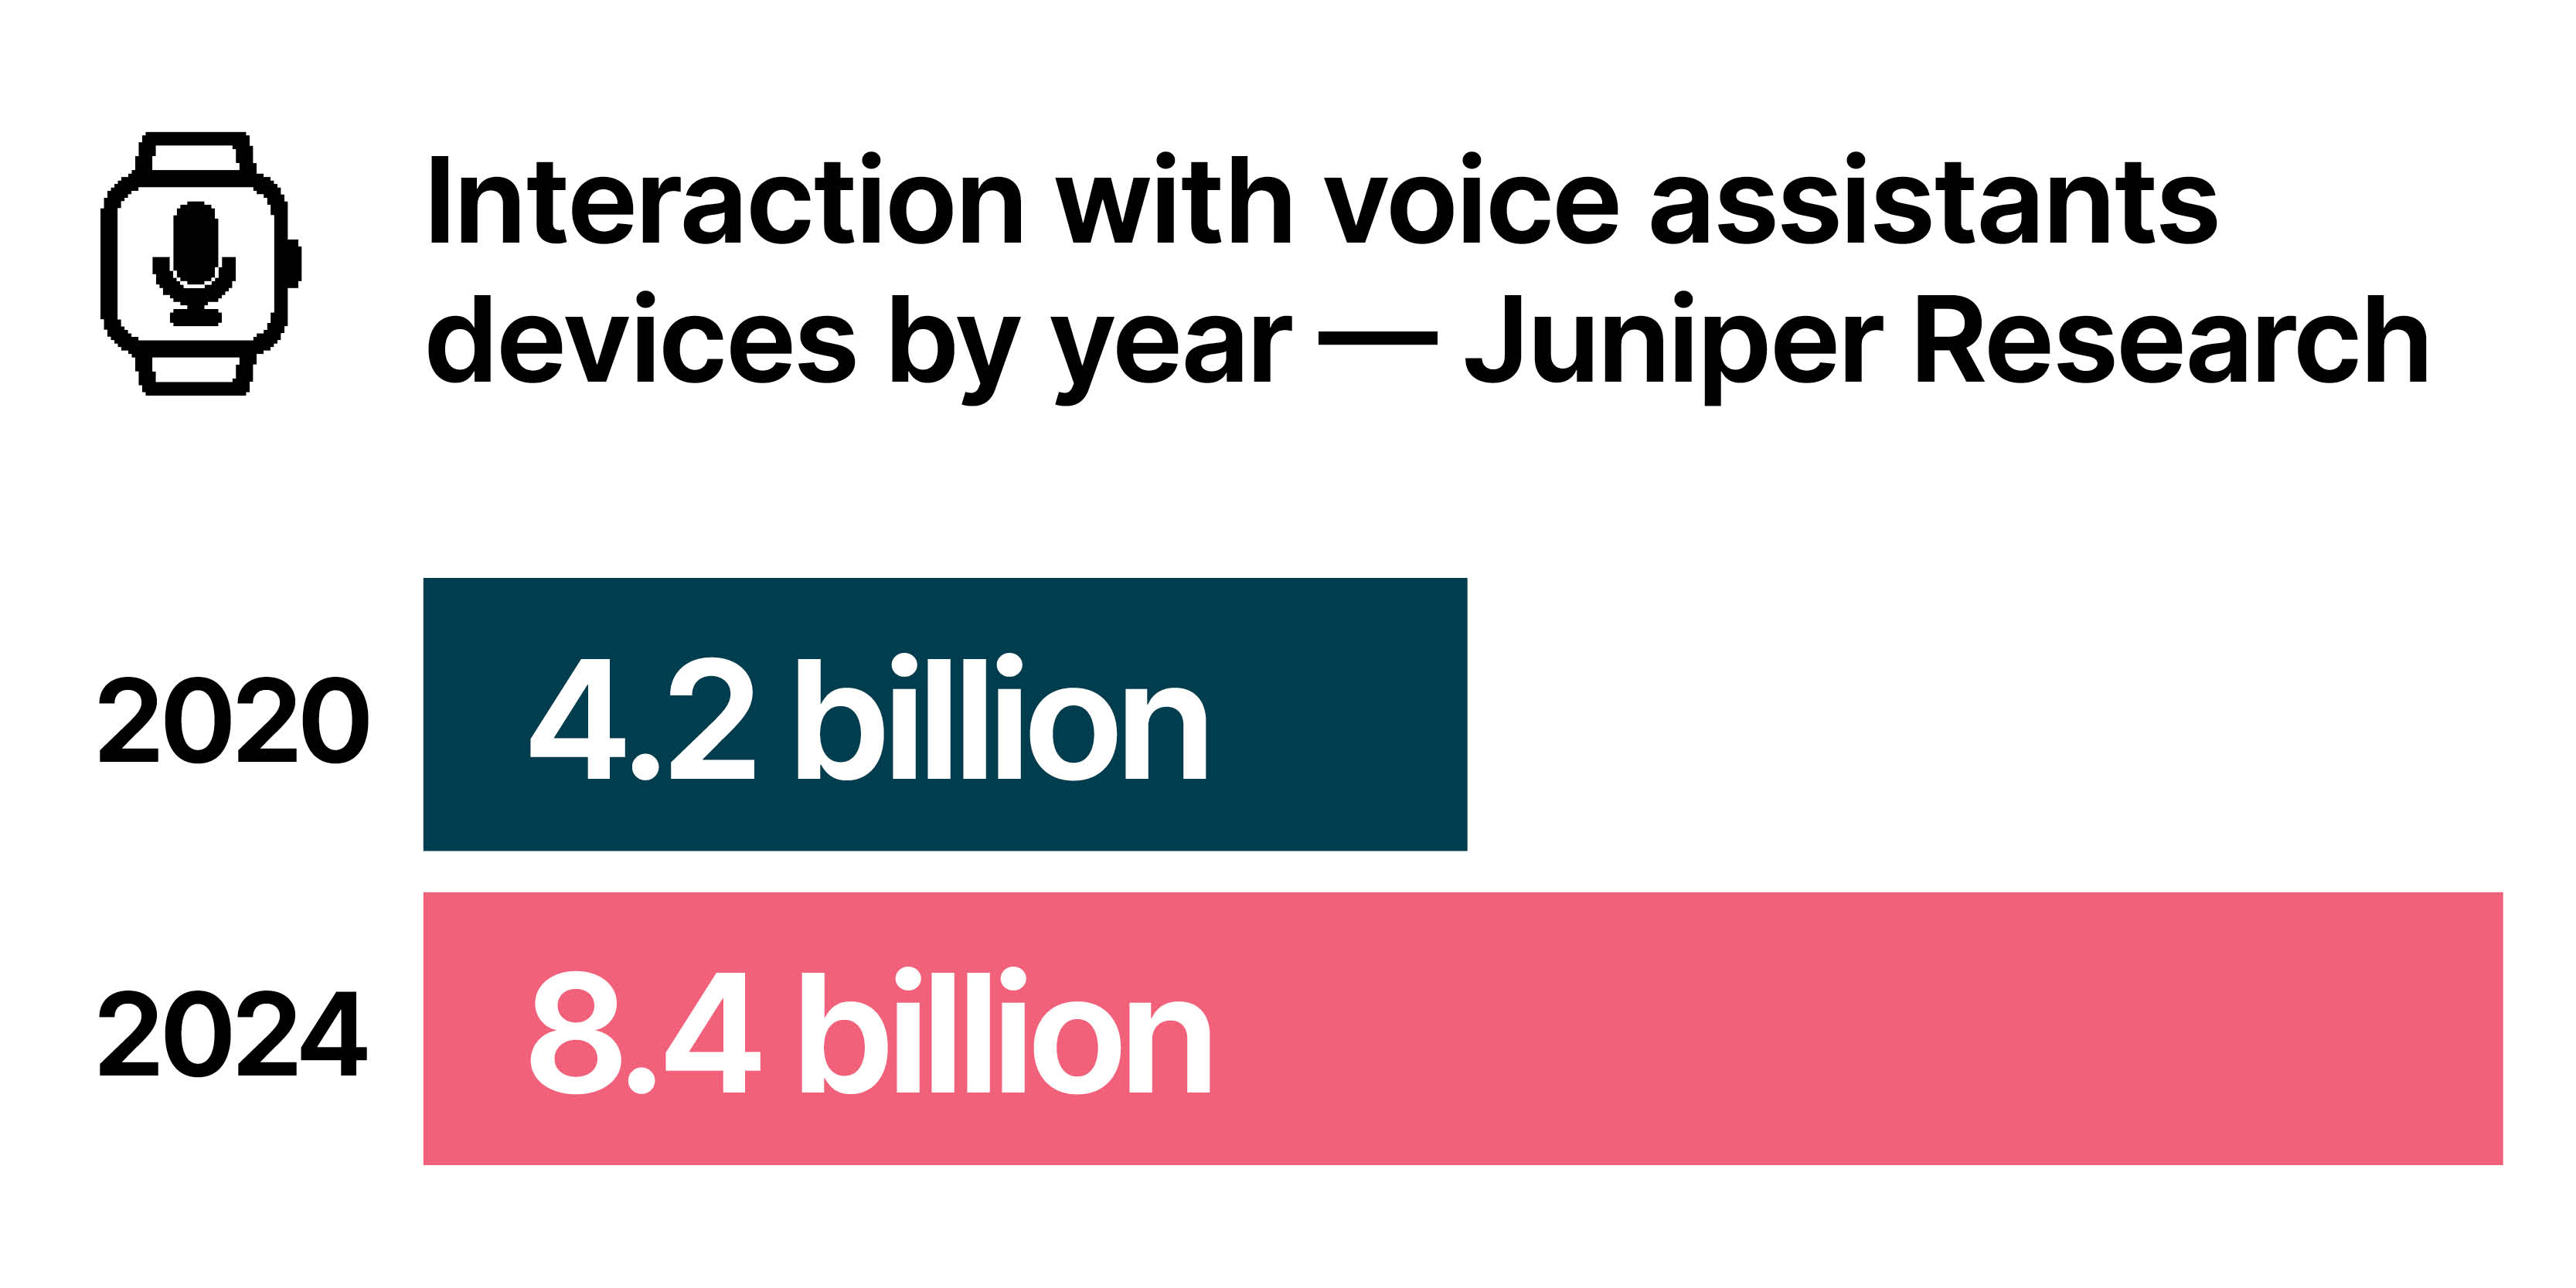 Interaction with voice assistants devices by year